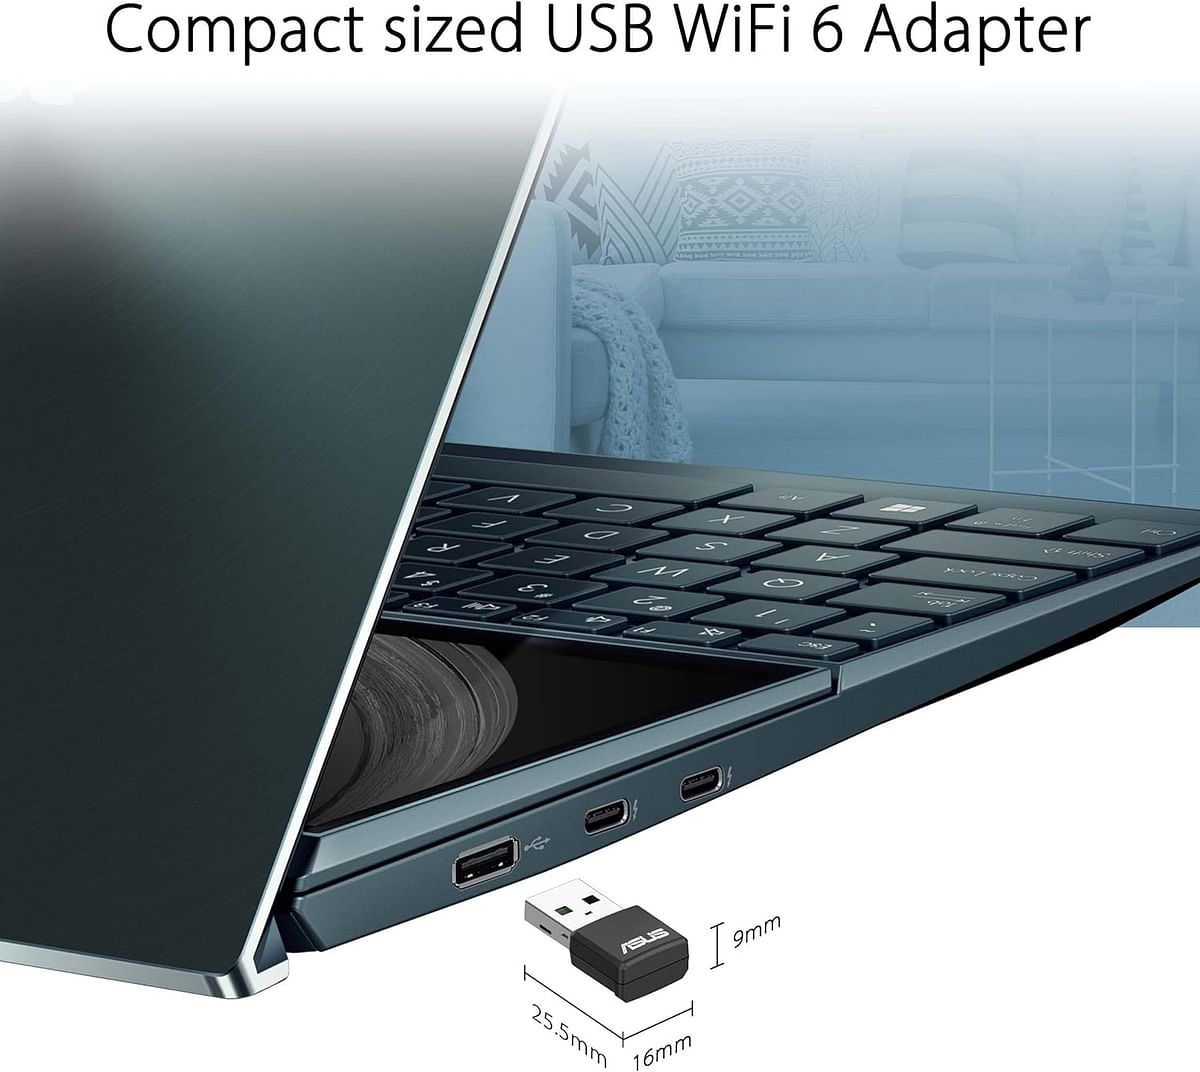 ASUS USB-AX55 Nano AX1800 Dual Band WiFi 6 USB Adapter, 1.8 Gbps Data Transfer Rate, 5GHz Frequency Band, OFDMA / MU-MIMO Ultra-high Efficiency, WPA3 Security - Black